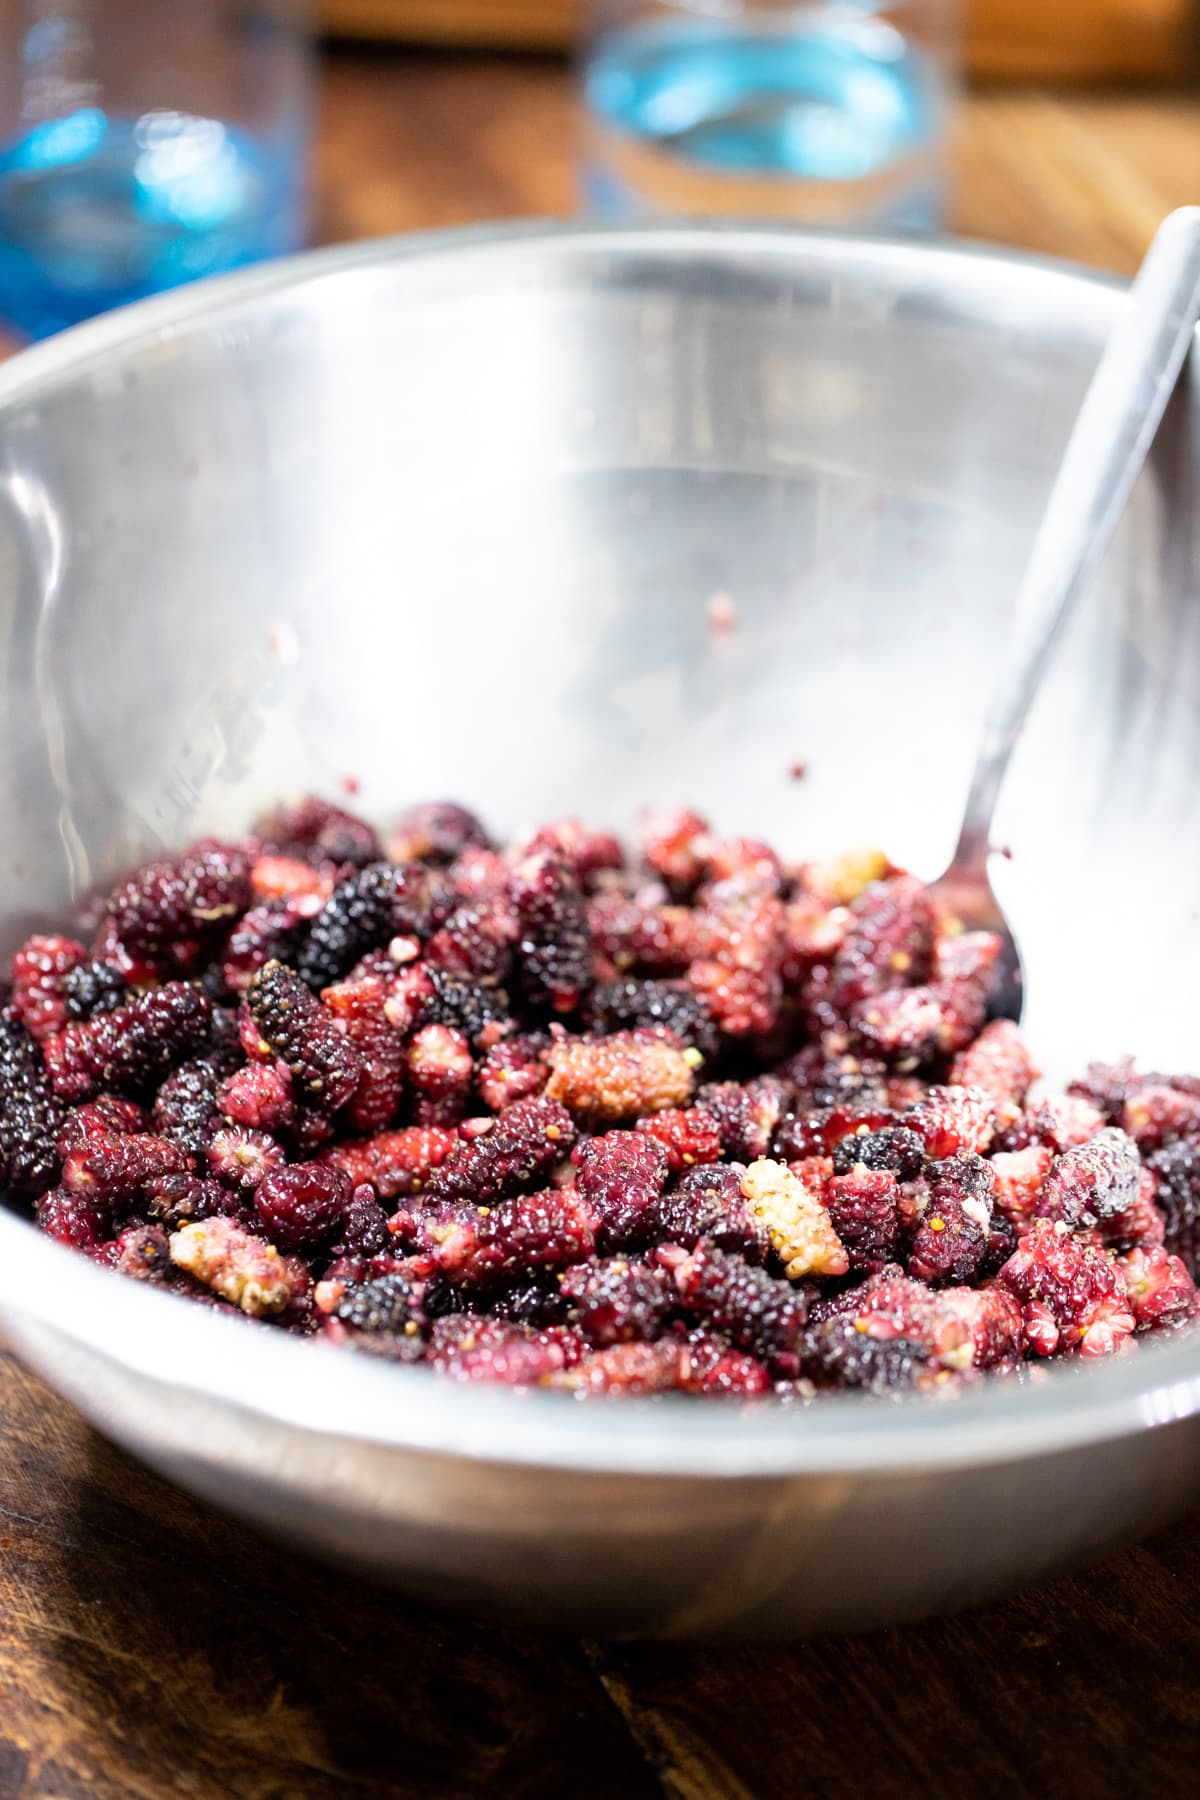 adding the filling ingredients to the mulberries